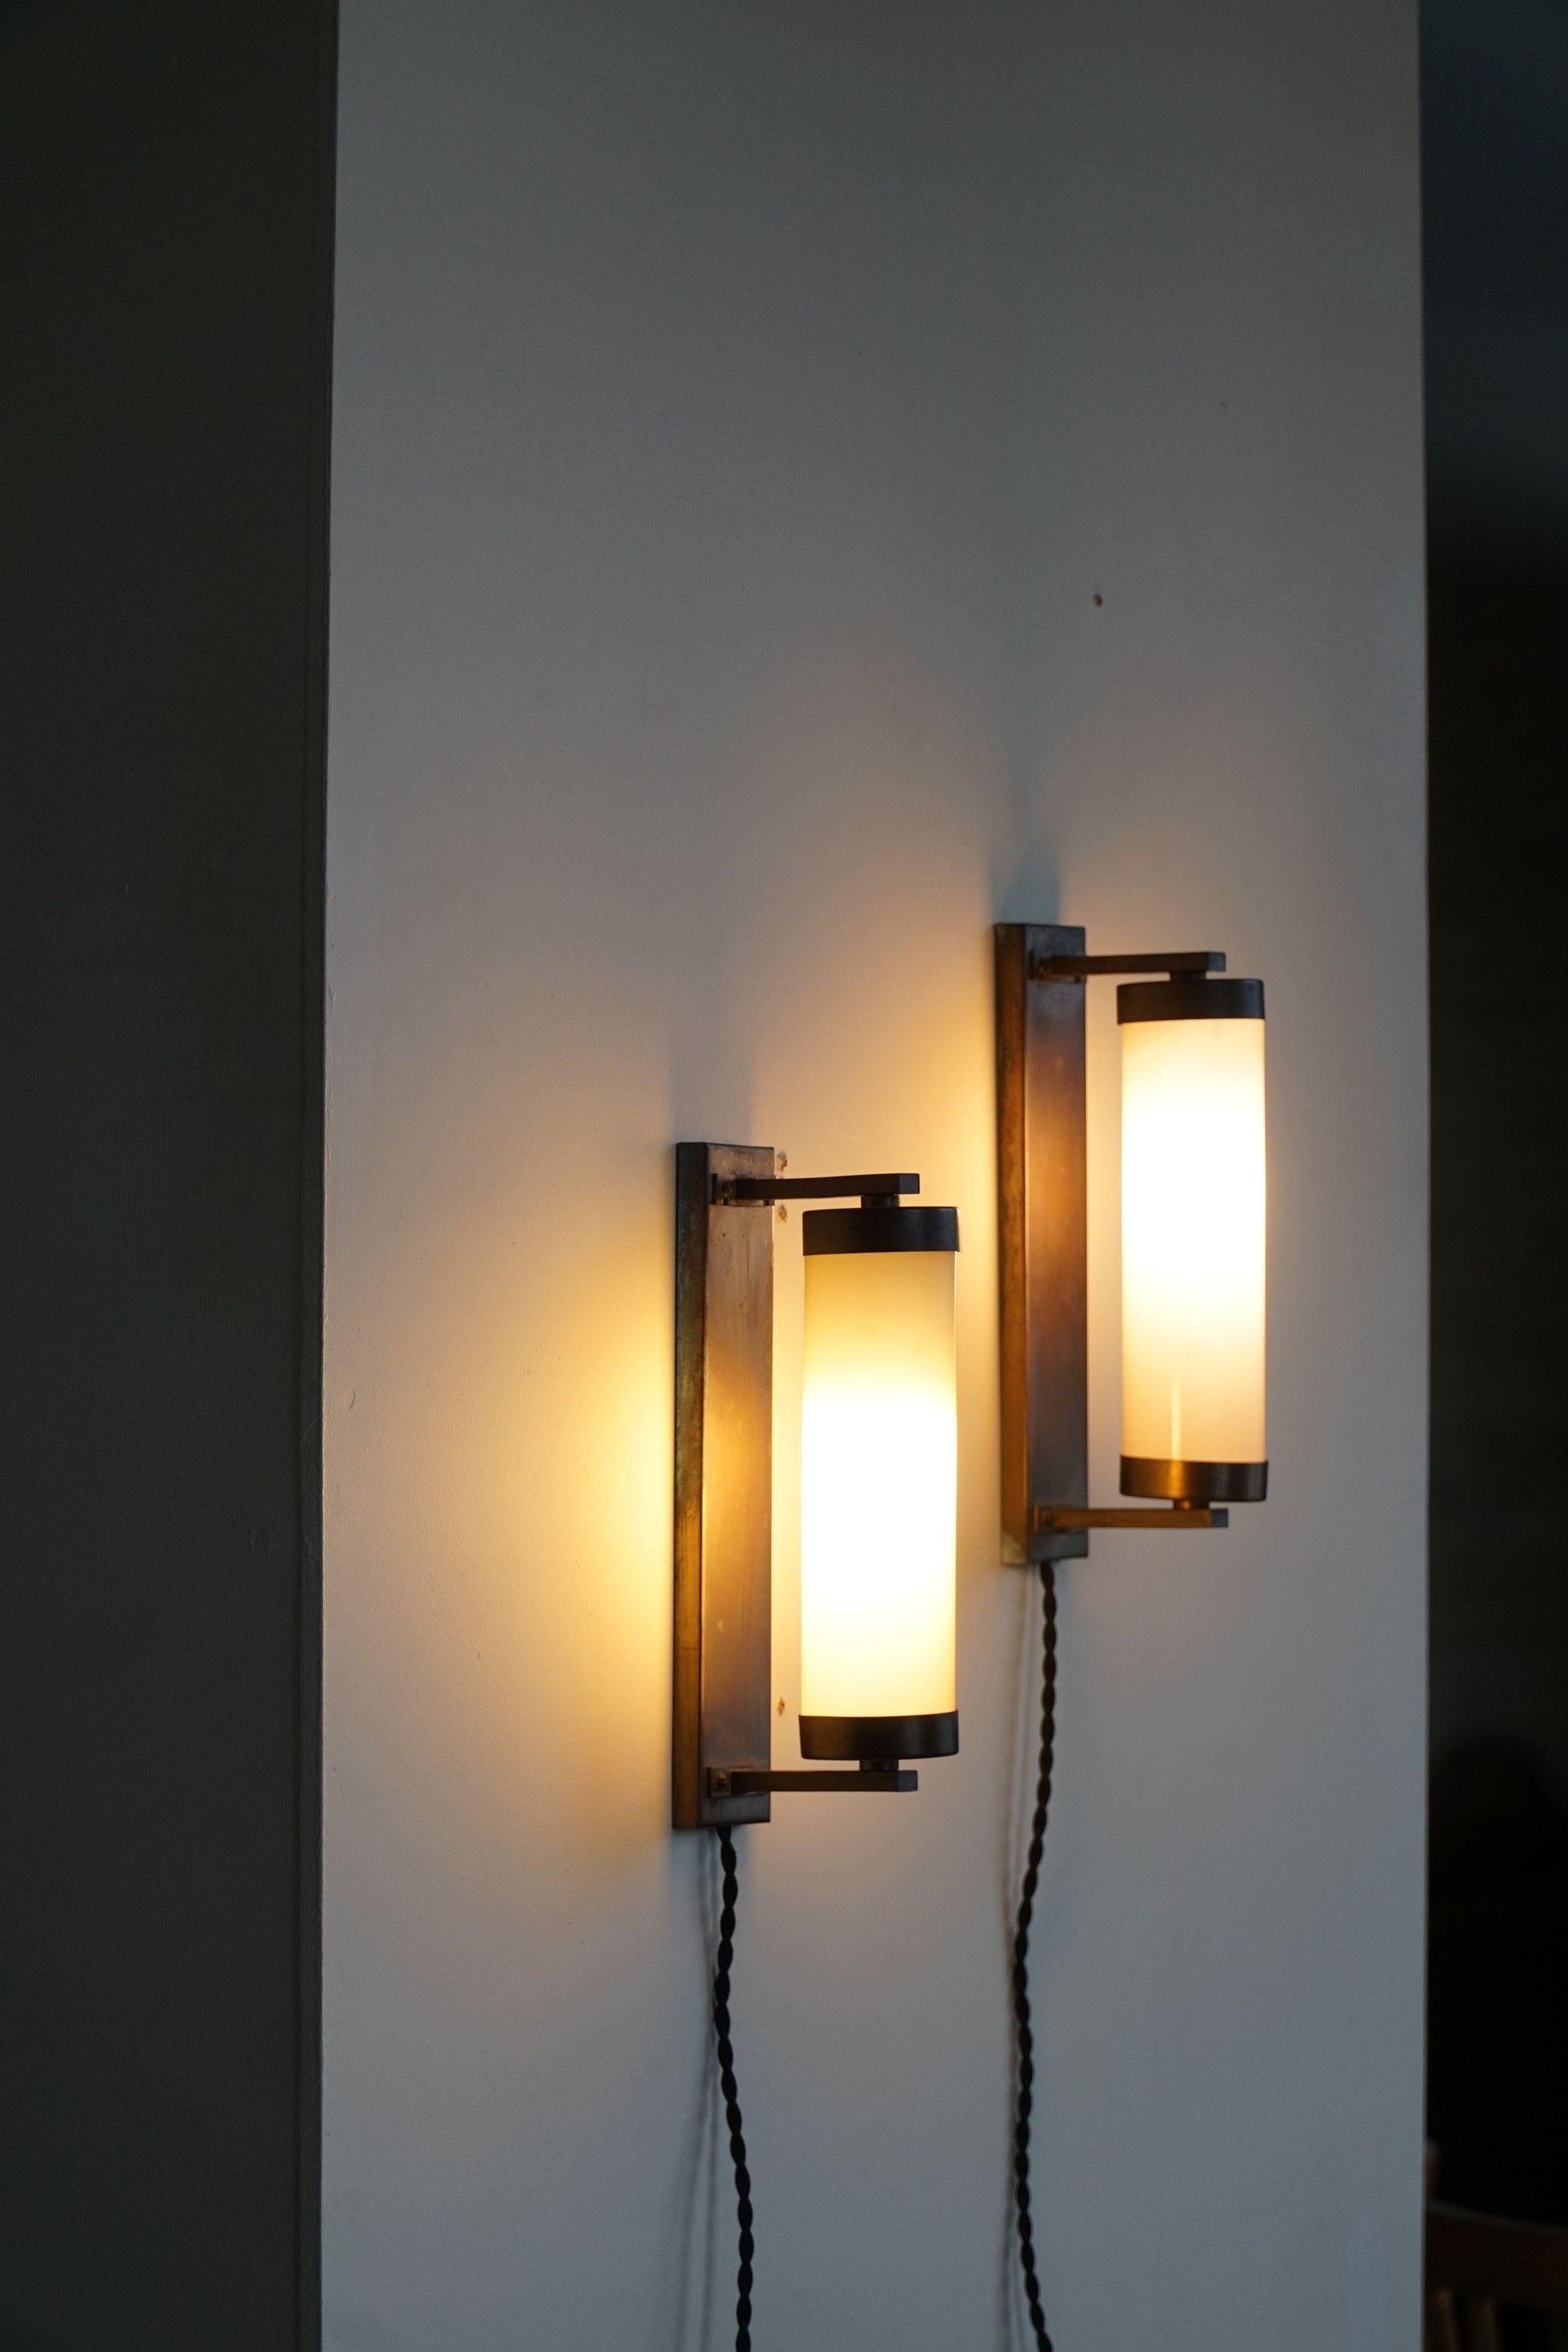 A rare pair of exclusive Art Deco wall lights in copper & glass. Made in Denmark, ca 1920s. Reminds us of some early work from Louis Poulsen.

The pair is nicely patinated and gives a really comfortable light.

Great lines and a fine quality,